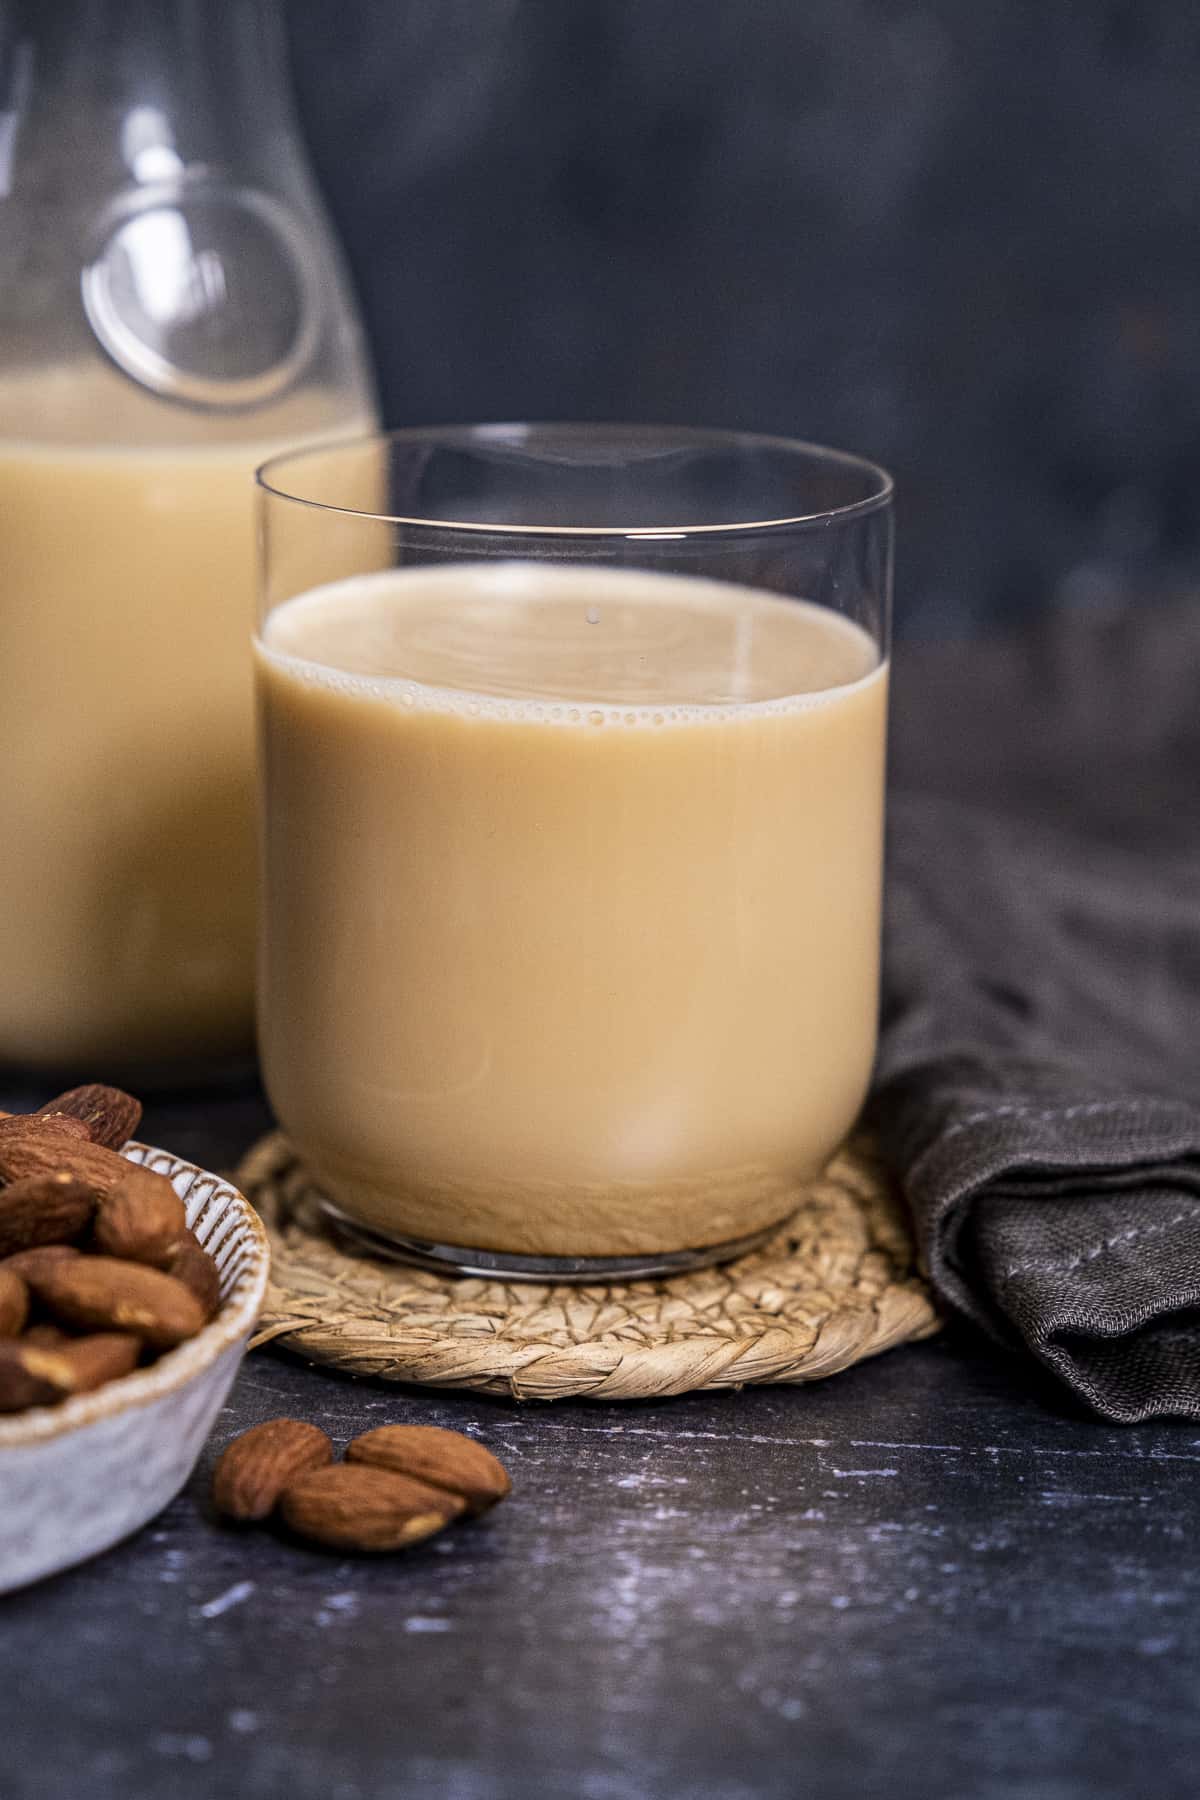 Almond milk with a nice light brown color in a glass and in a bottle and whole almonds on the side.